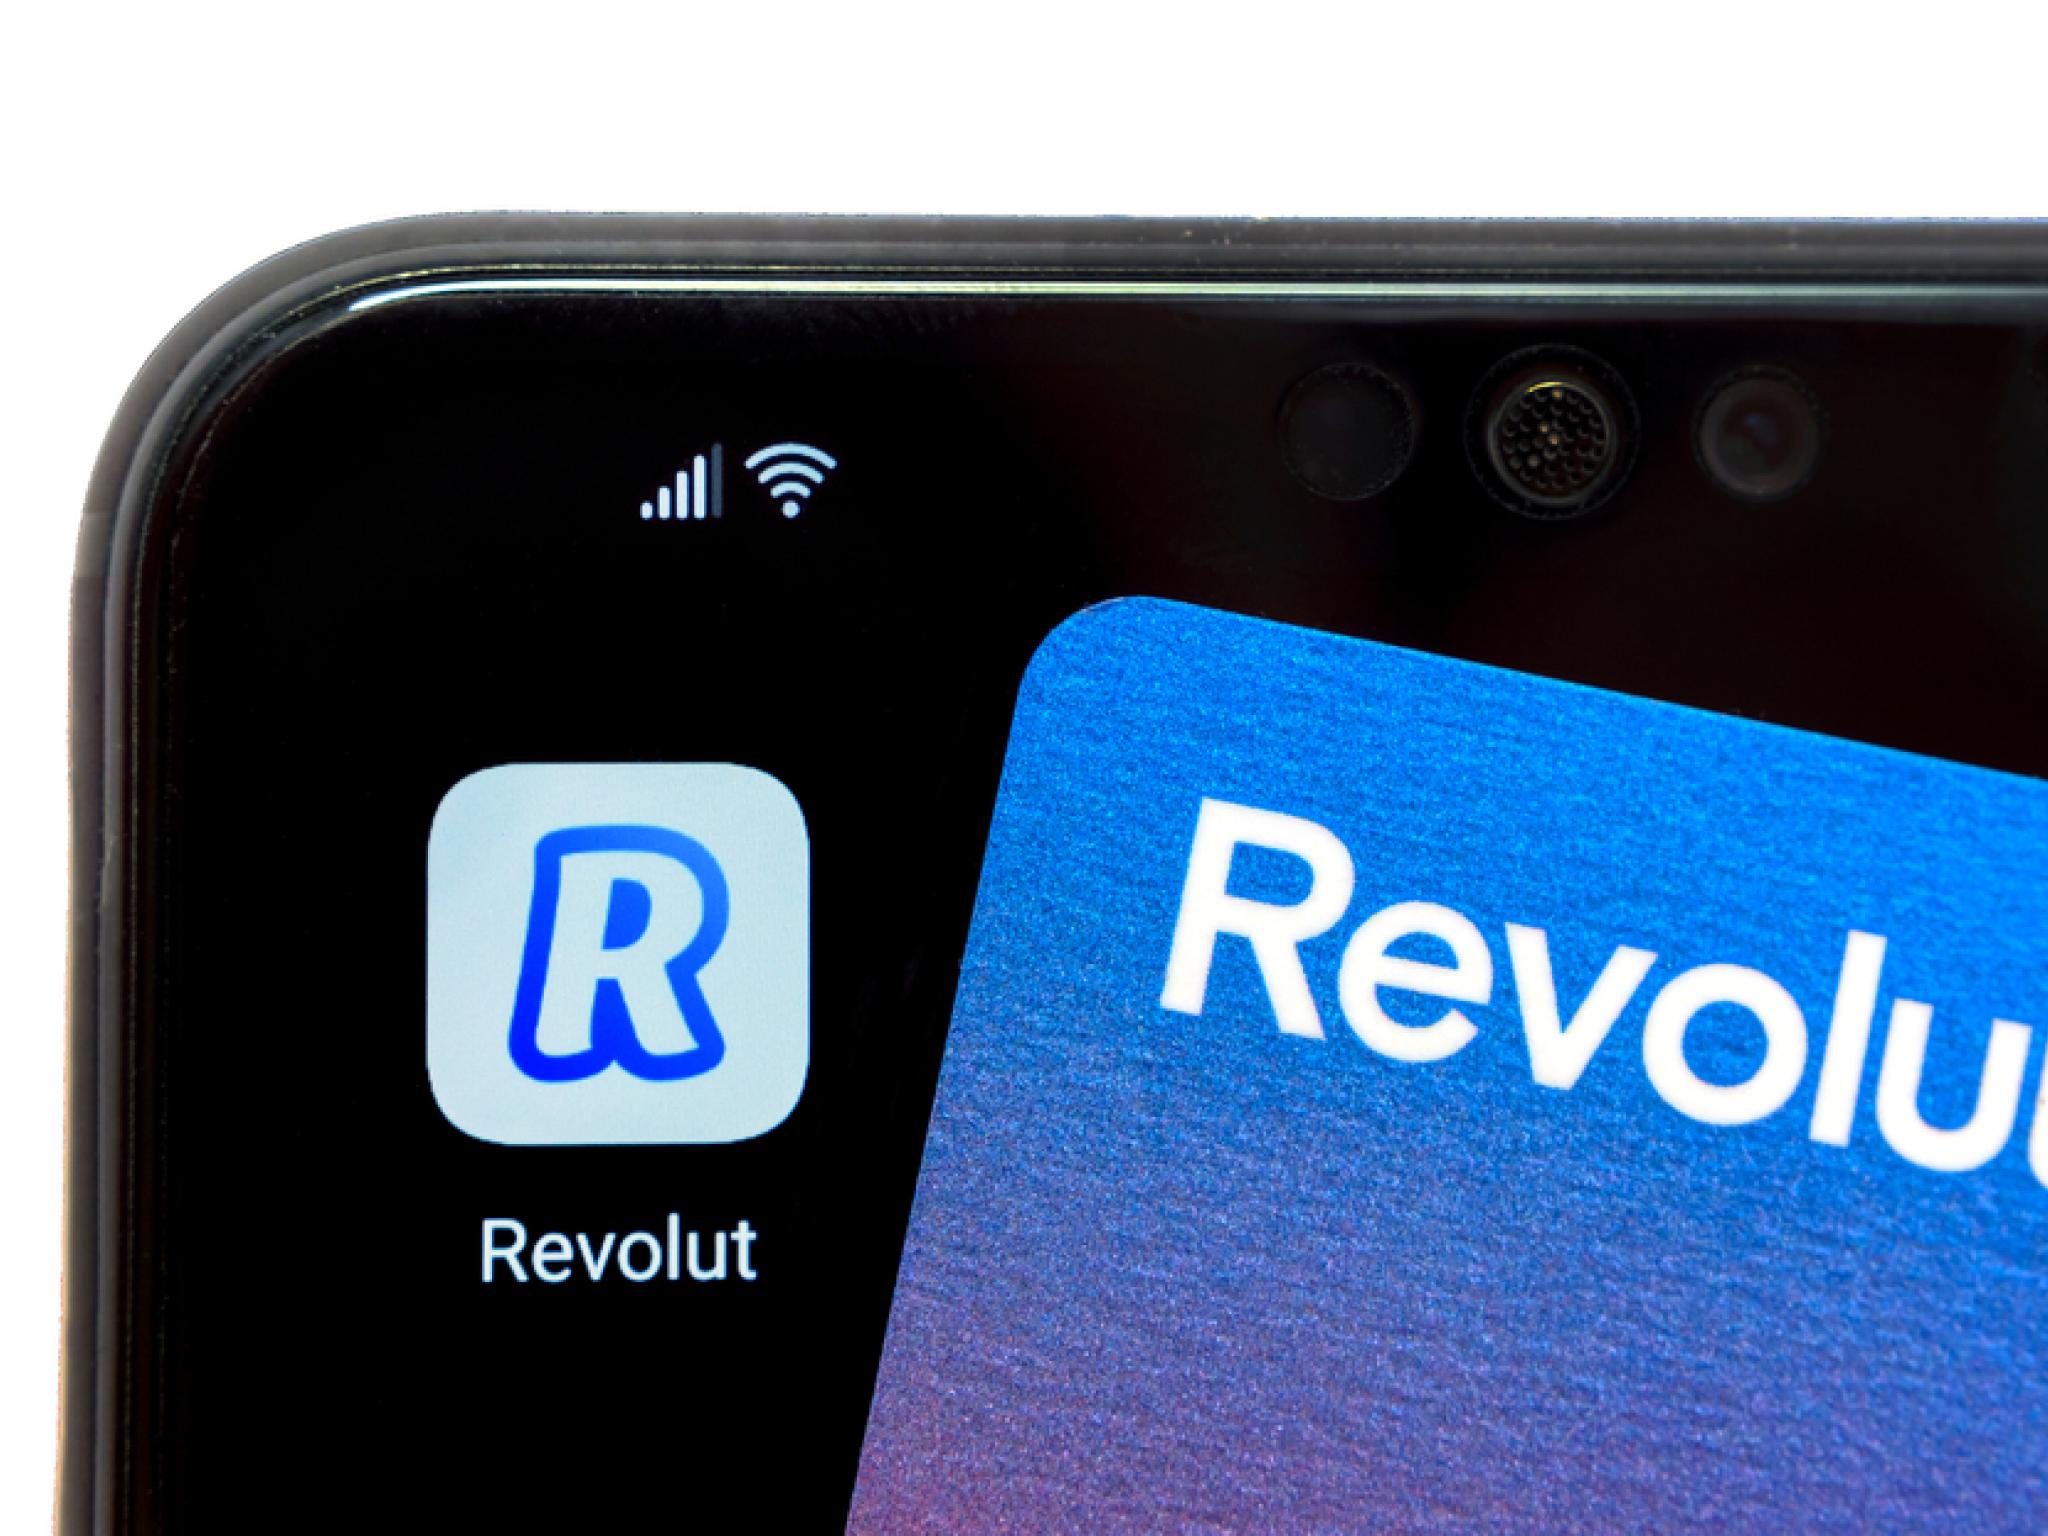  revolut-launches-crypto-staking-soft-launch-begins-in-uk-and-eea-report 